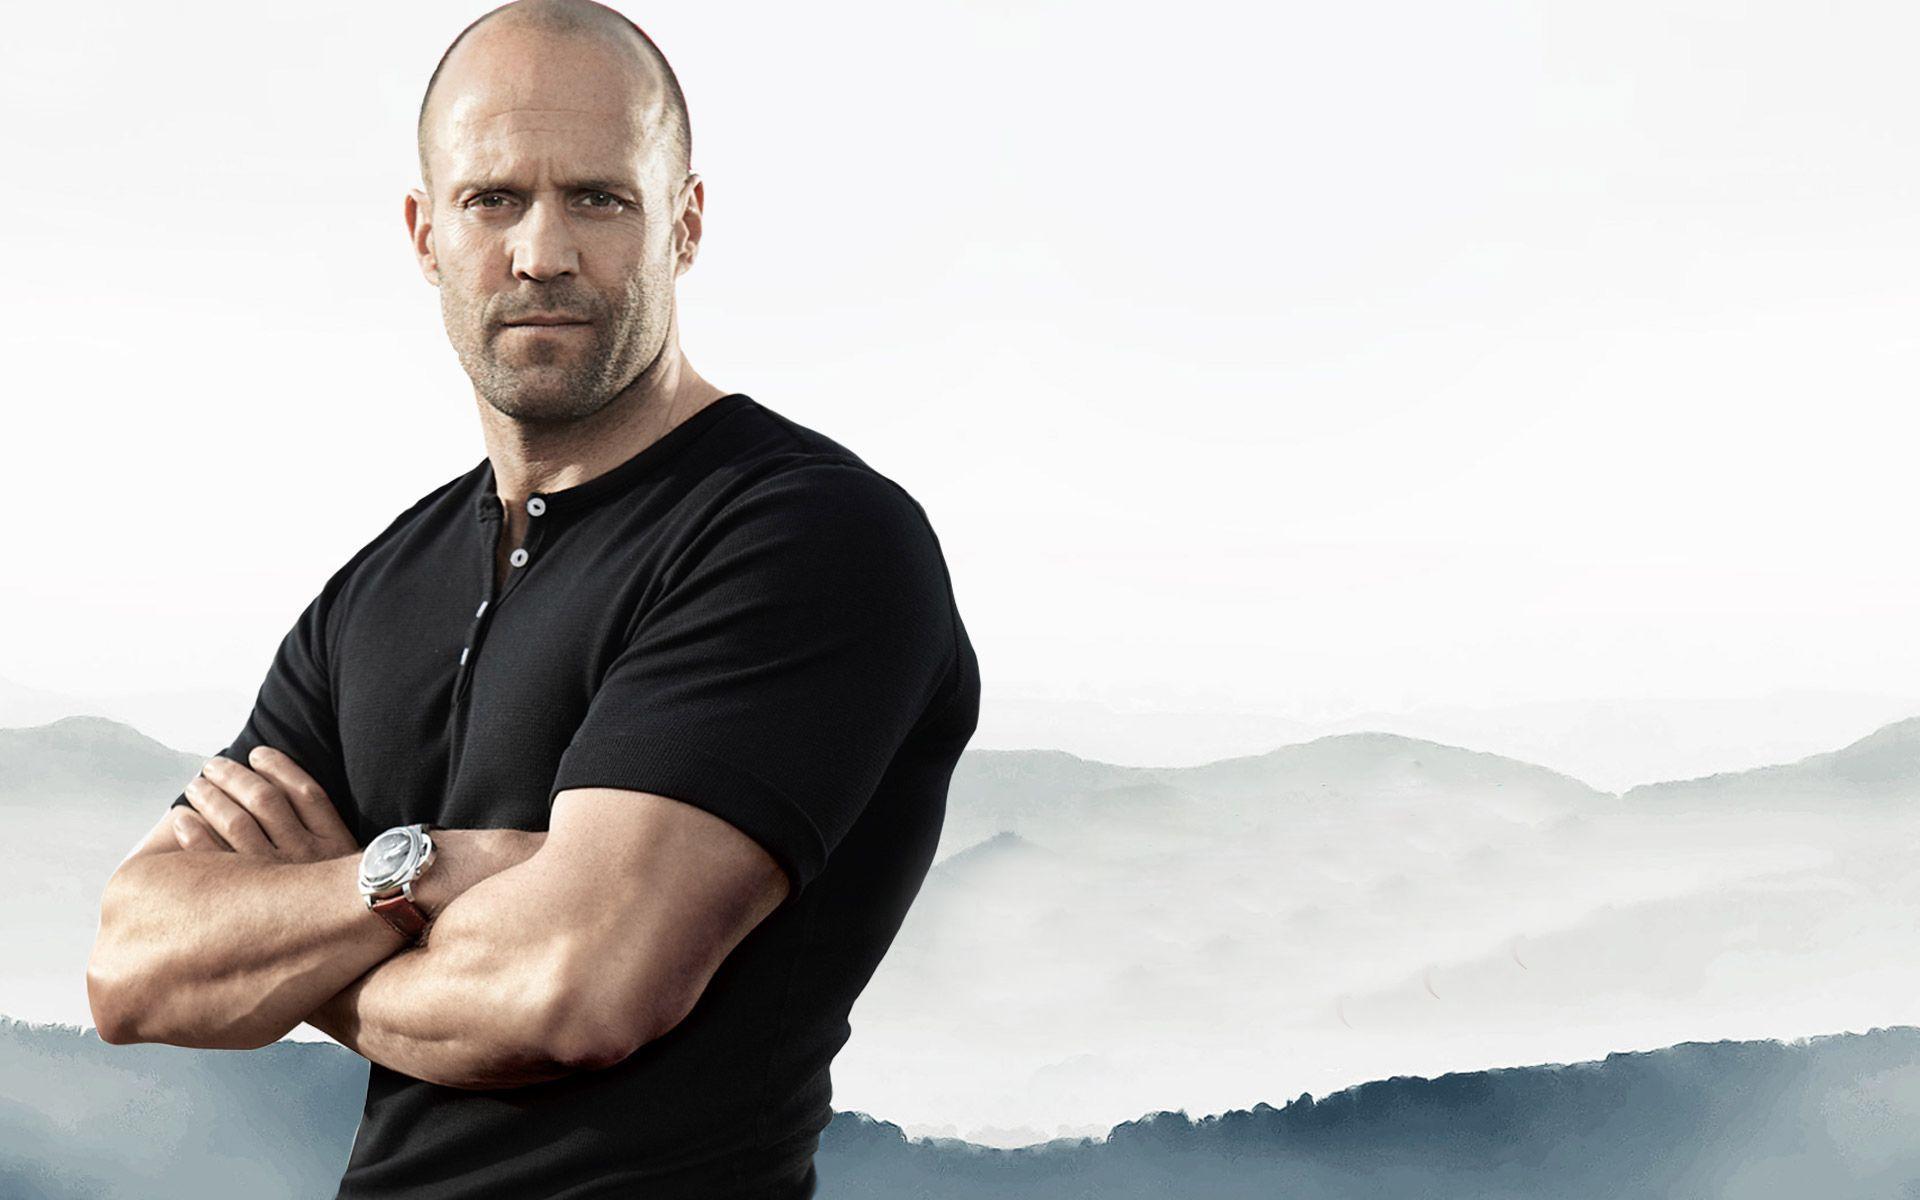 Jason Statham Wallpaper High Resolution and Quality Download